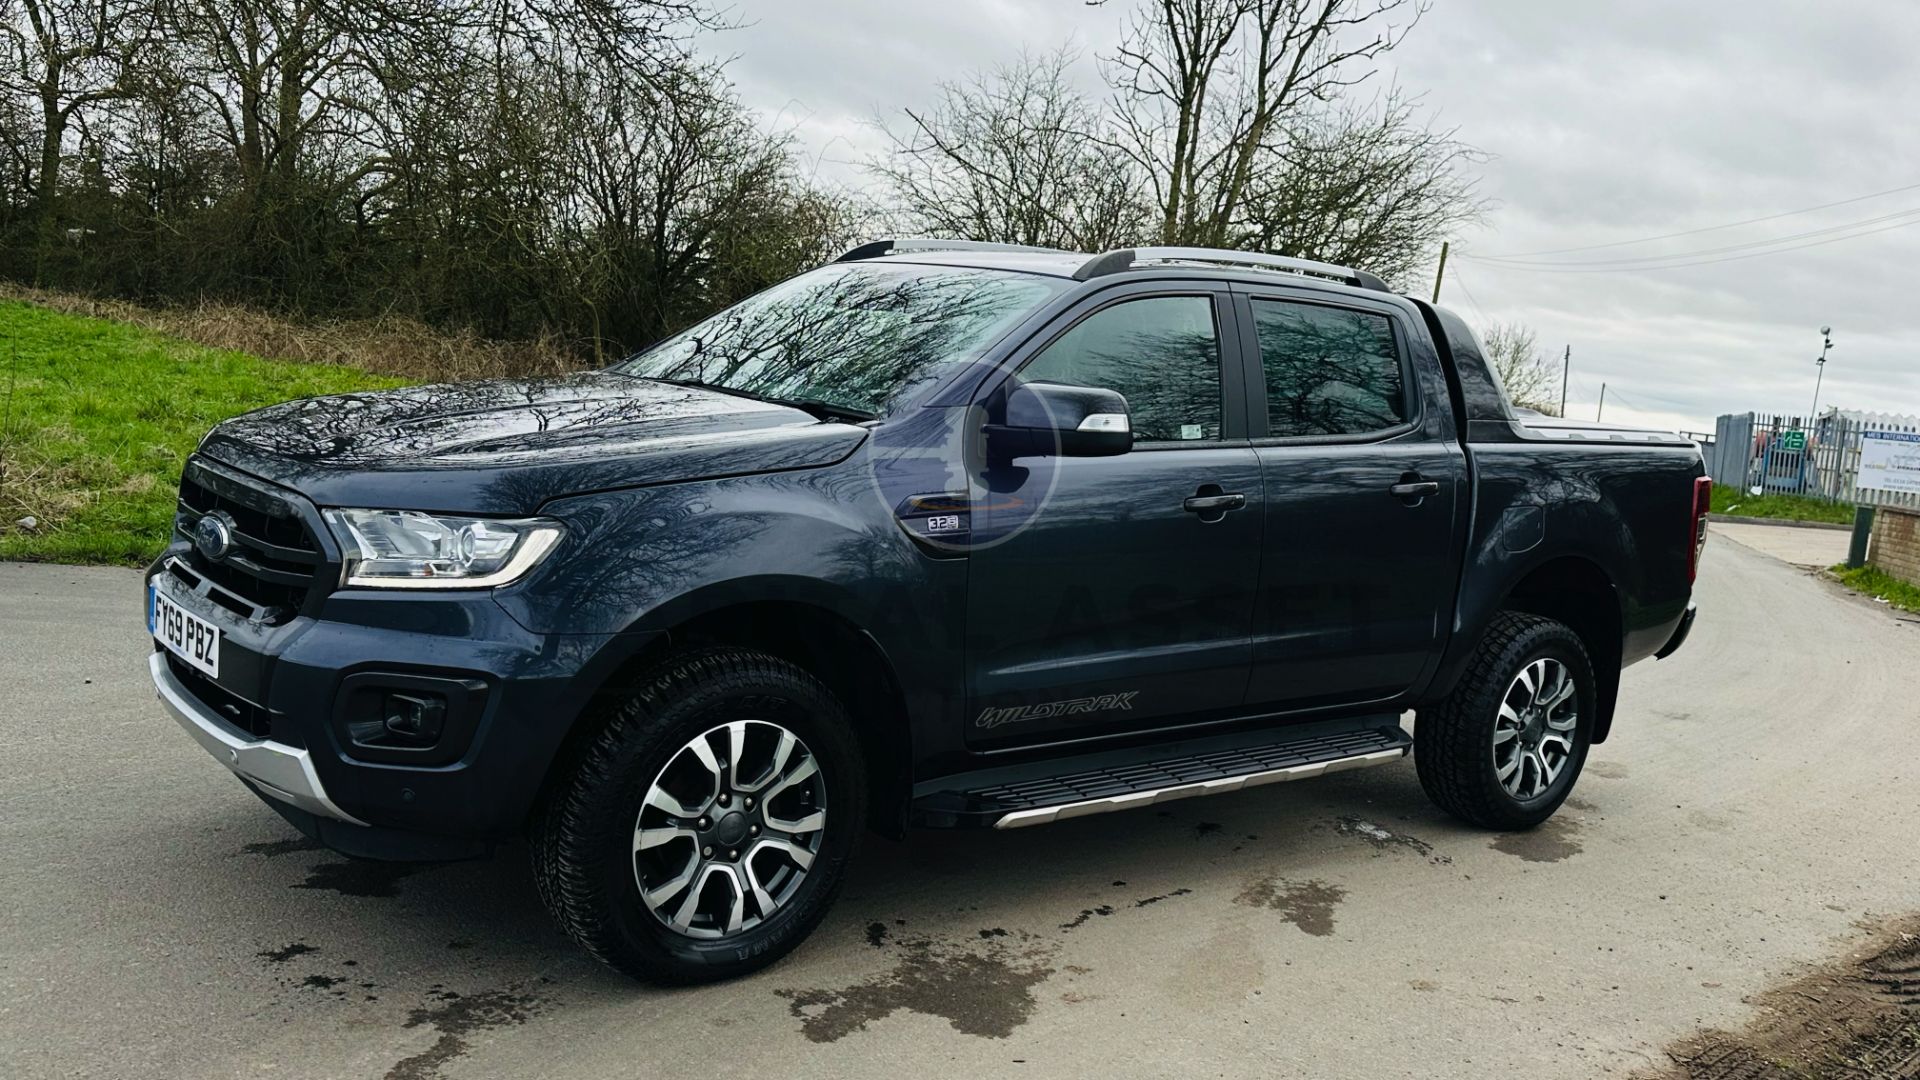 FORD RANGER *WILDTRAK EDITION* DOUBLE CAB PICK-UP (2020 - EURO 6) 3.2 TDCI - AUTOMATIC *HUGE SPEC* - Image 7 of 49